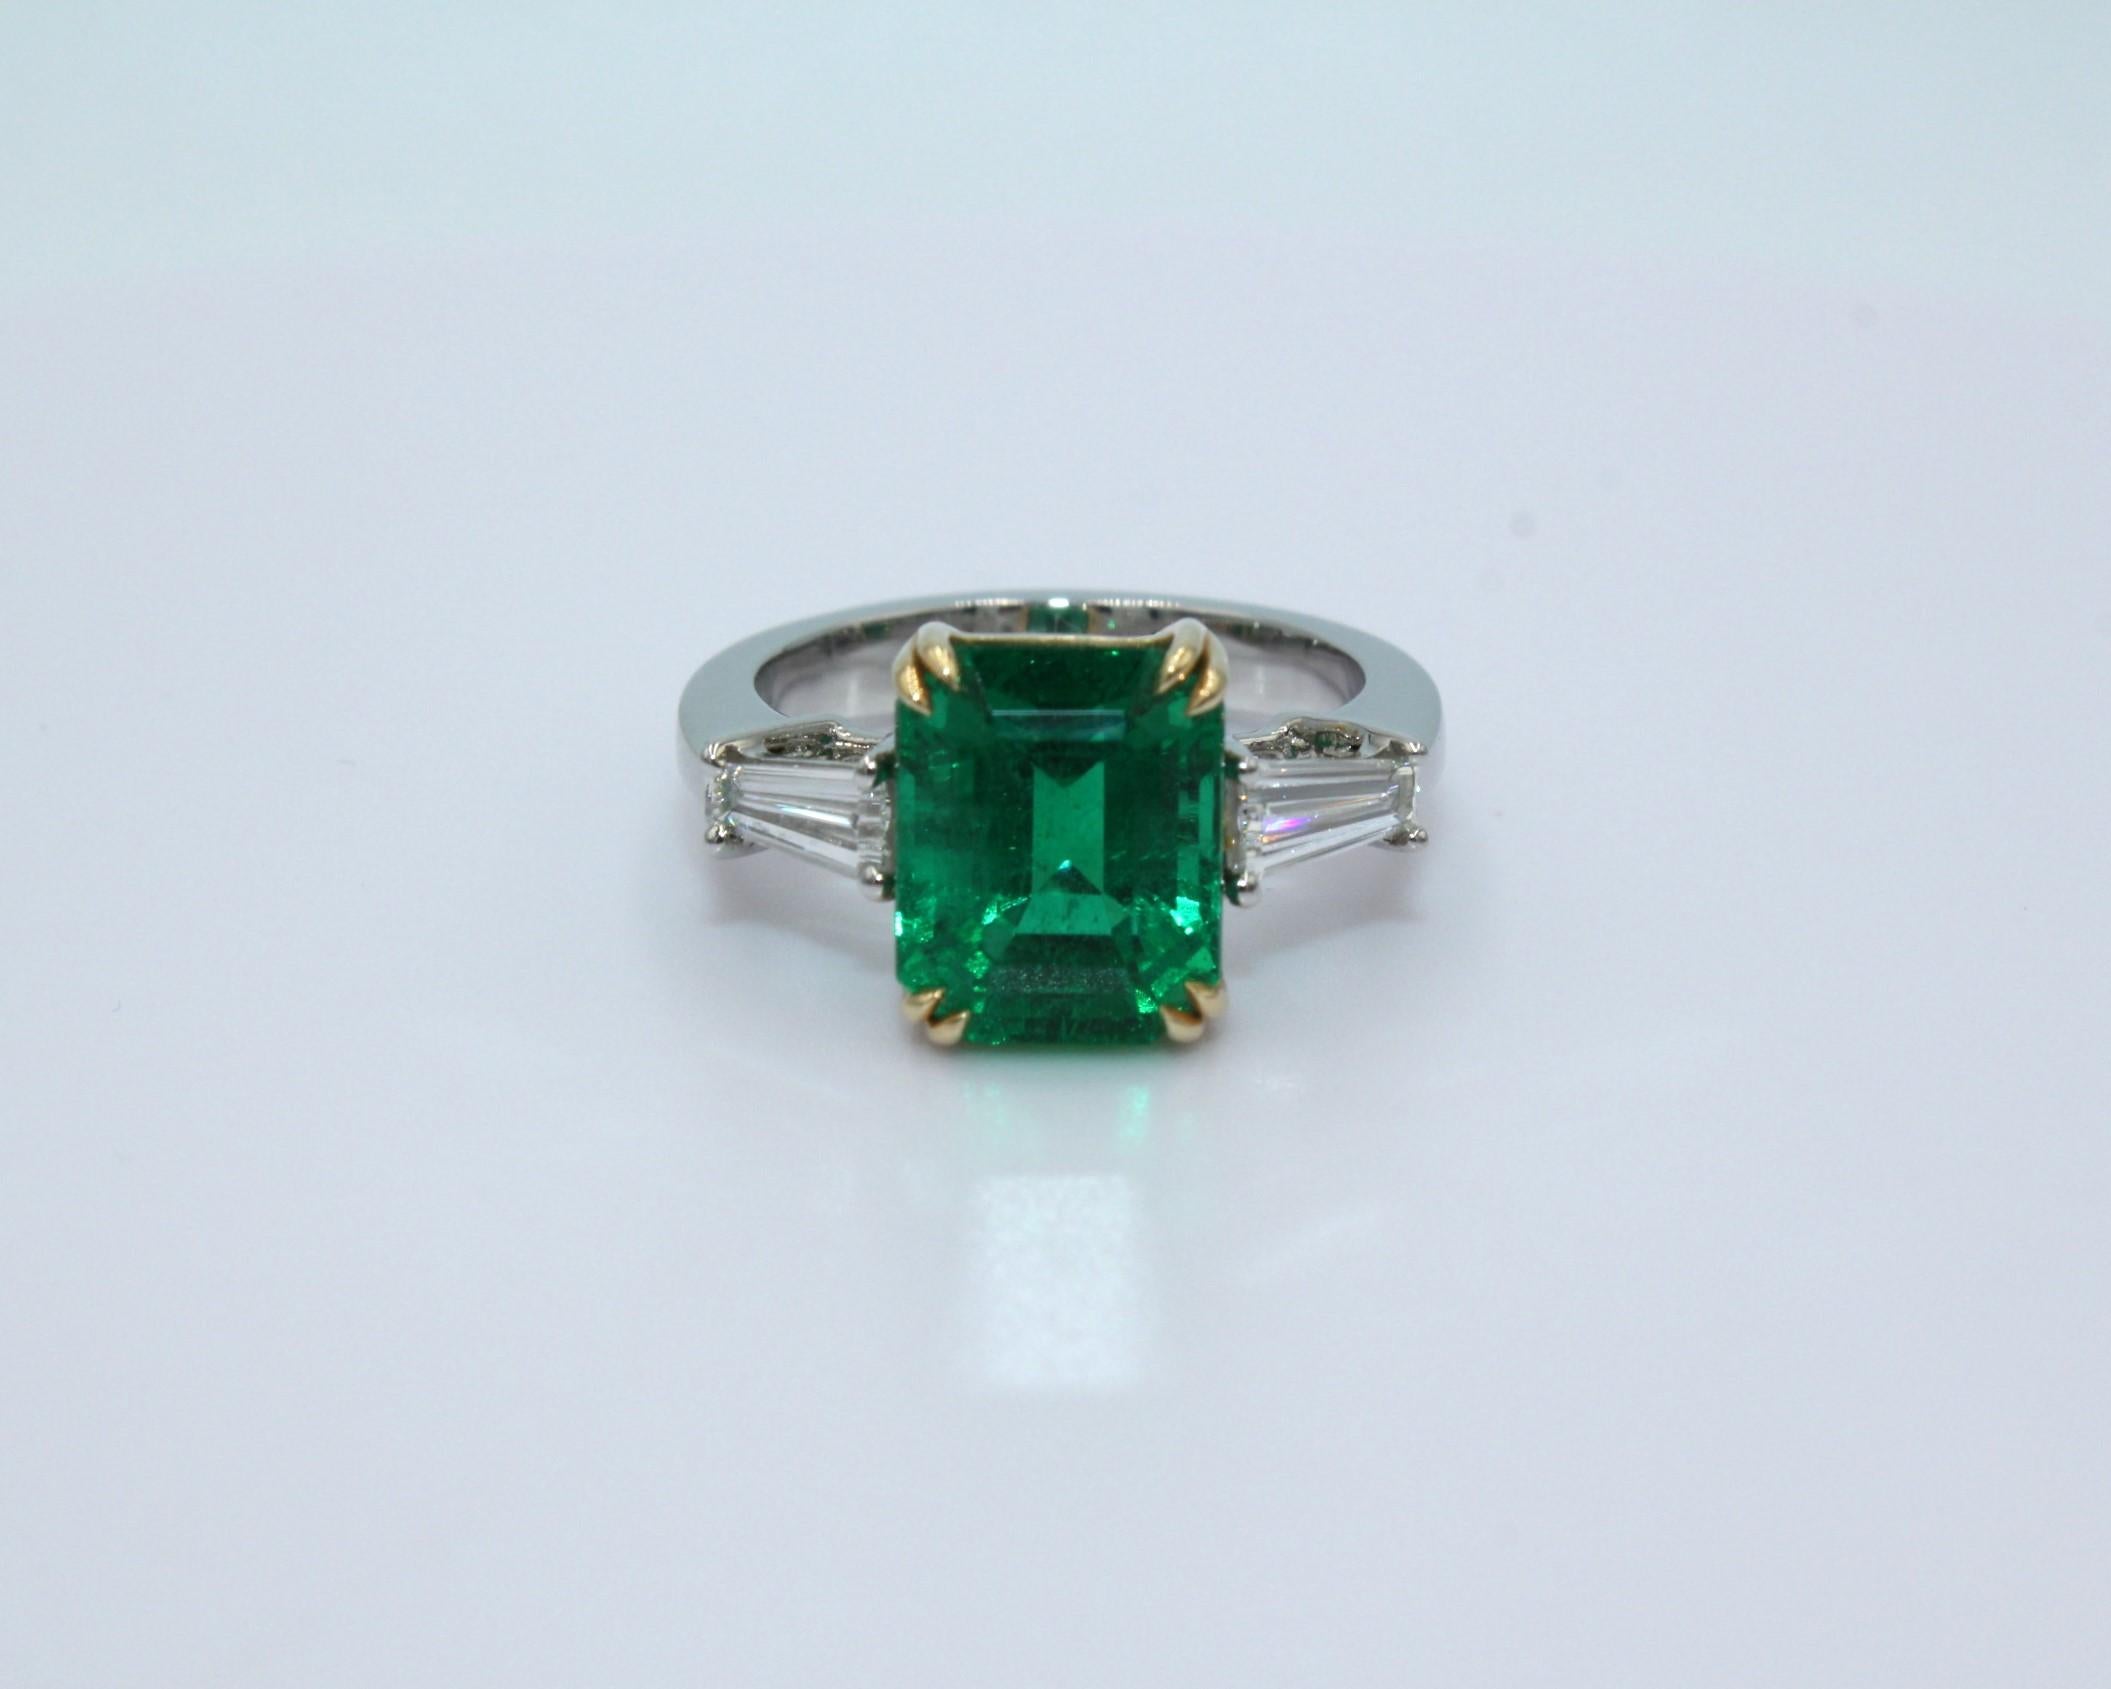 Three-Stone Ring with 4.30 carats Emerald Cut Zambian Emerald and two Tapered Baguette diamonds, totaling diamond weight of 0.58 carat on the side. 

This stunning Emerald Diamond Ring will highlight your elegance and uniqueness. 

Item Details:
-